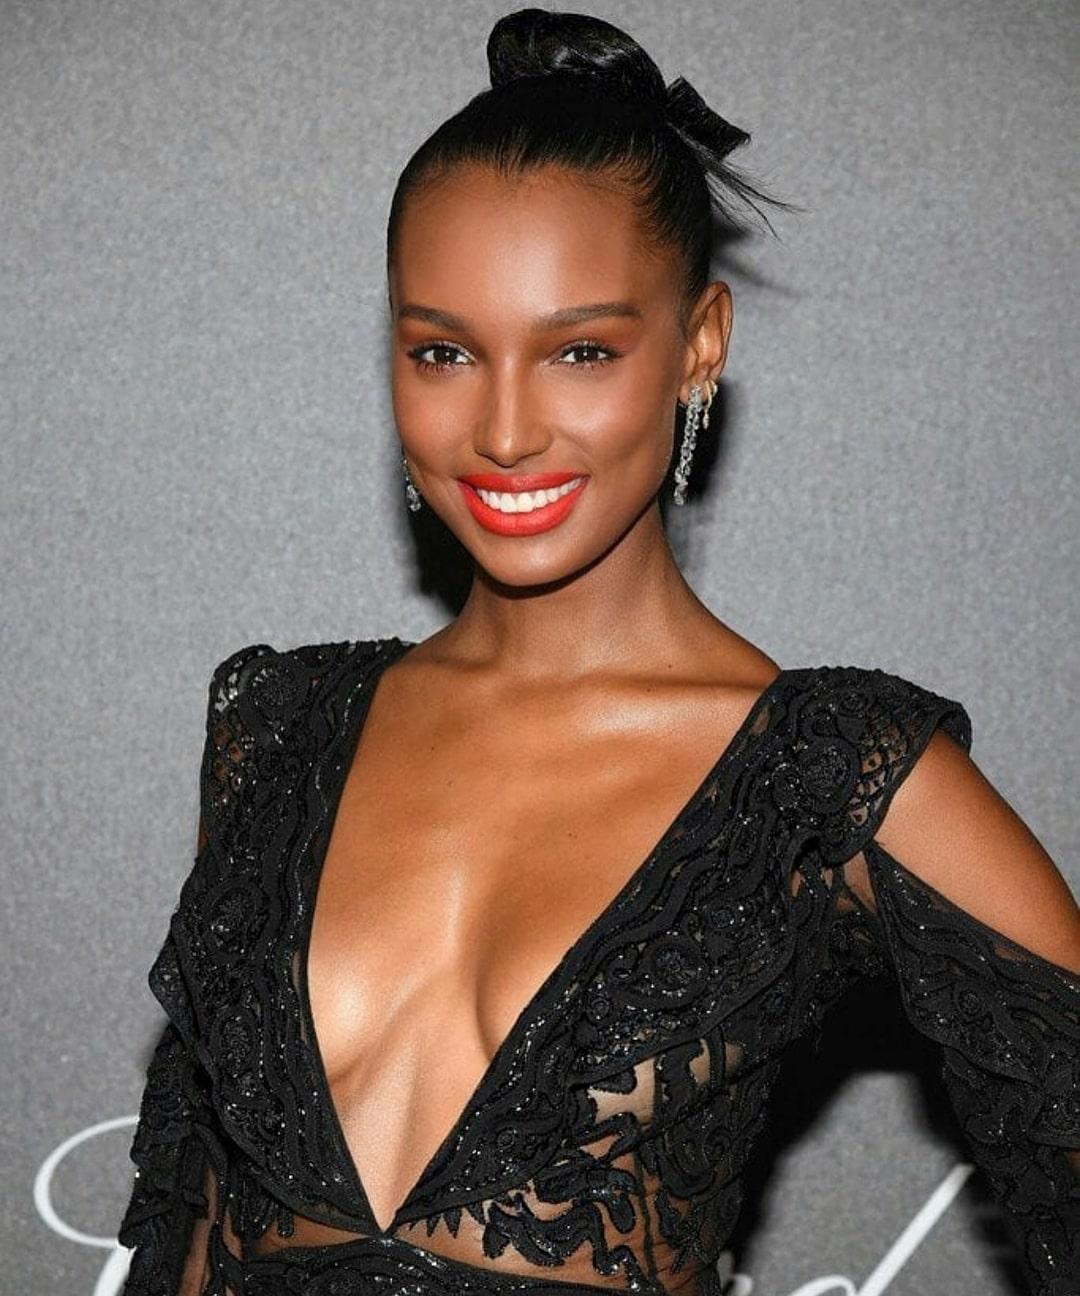 51 Hottest Jasmine Tookes Big Butt Pictures That Will Make Your Heart Pound For Her 28